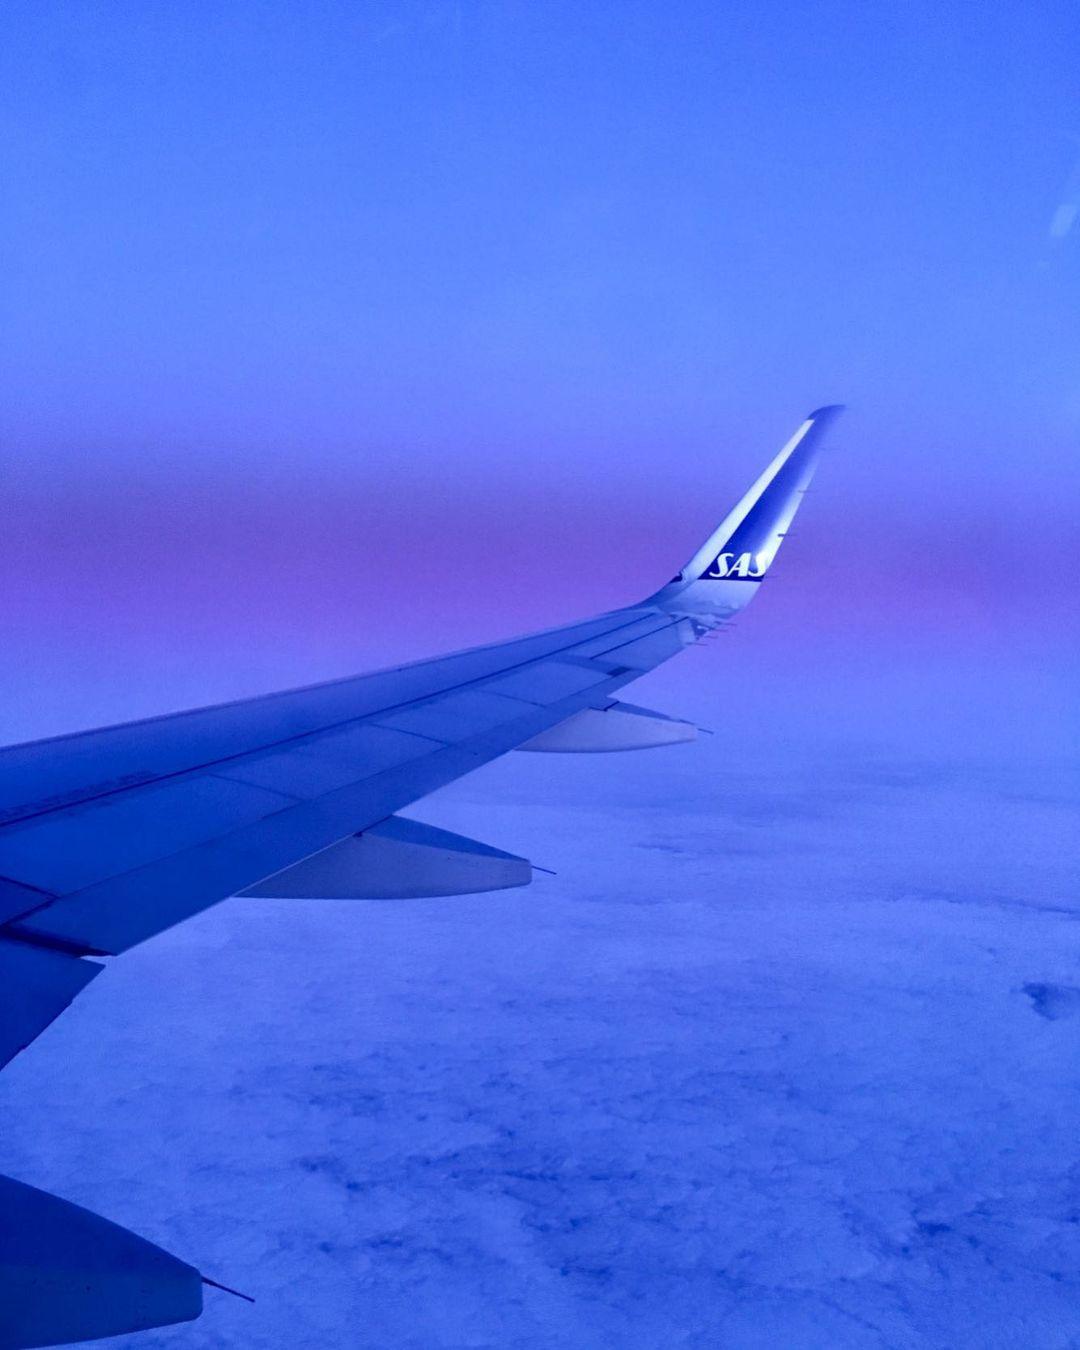 Taking off into the blue💙

When summer is coming to an end, we dream of skies in shades of blue - and of fall weekends to new places. Right now, we have great deals on flights to all our destinations when you book before August 30th. Link in bio!

Welcome onboard✈️

#flysas #wearetravelers